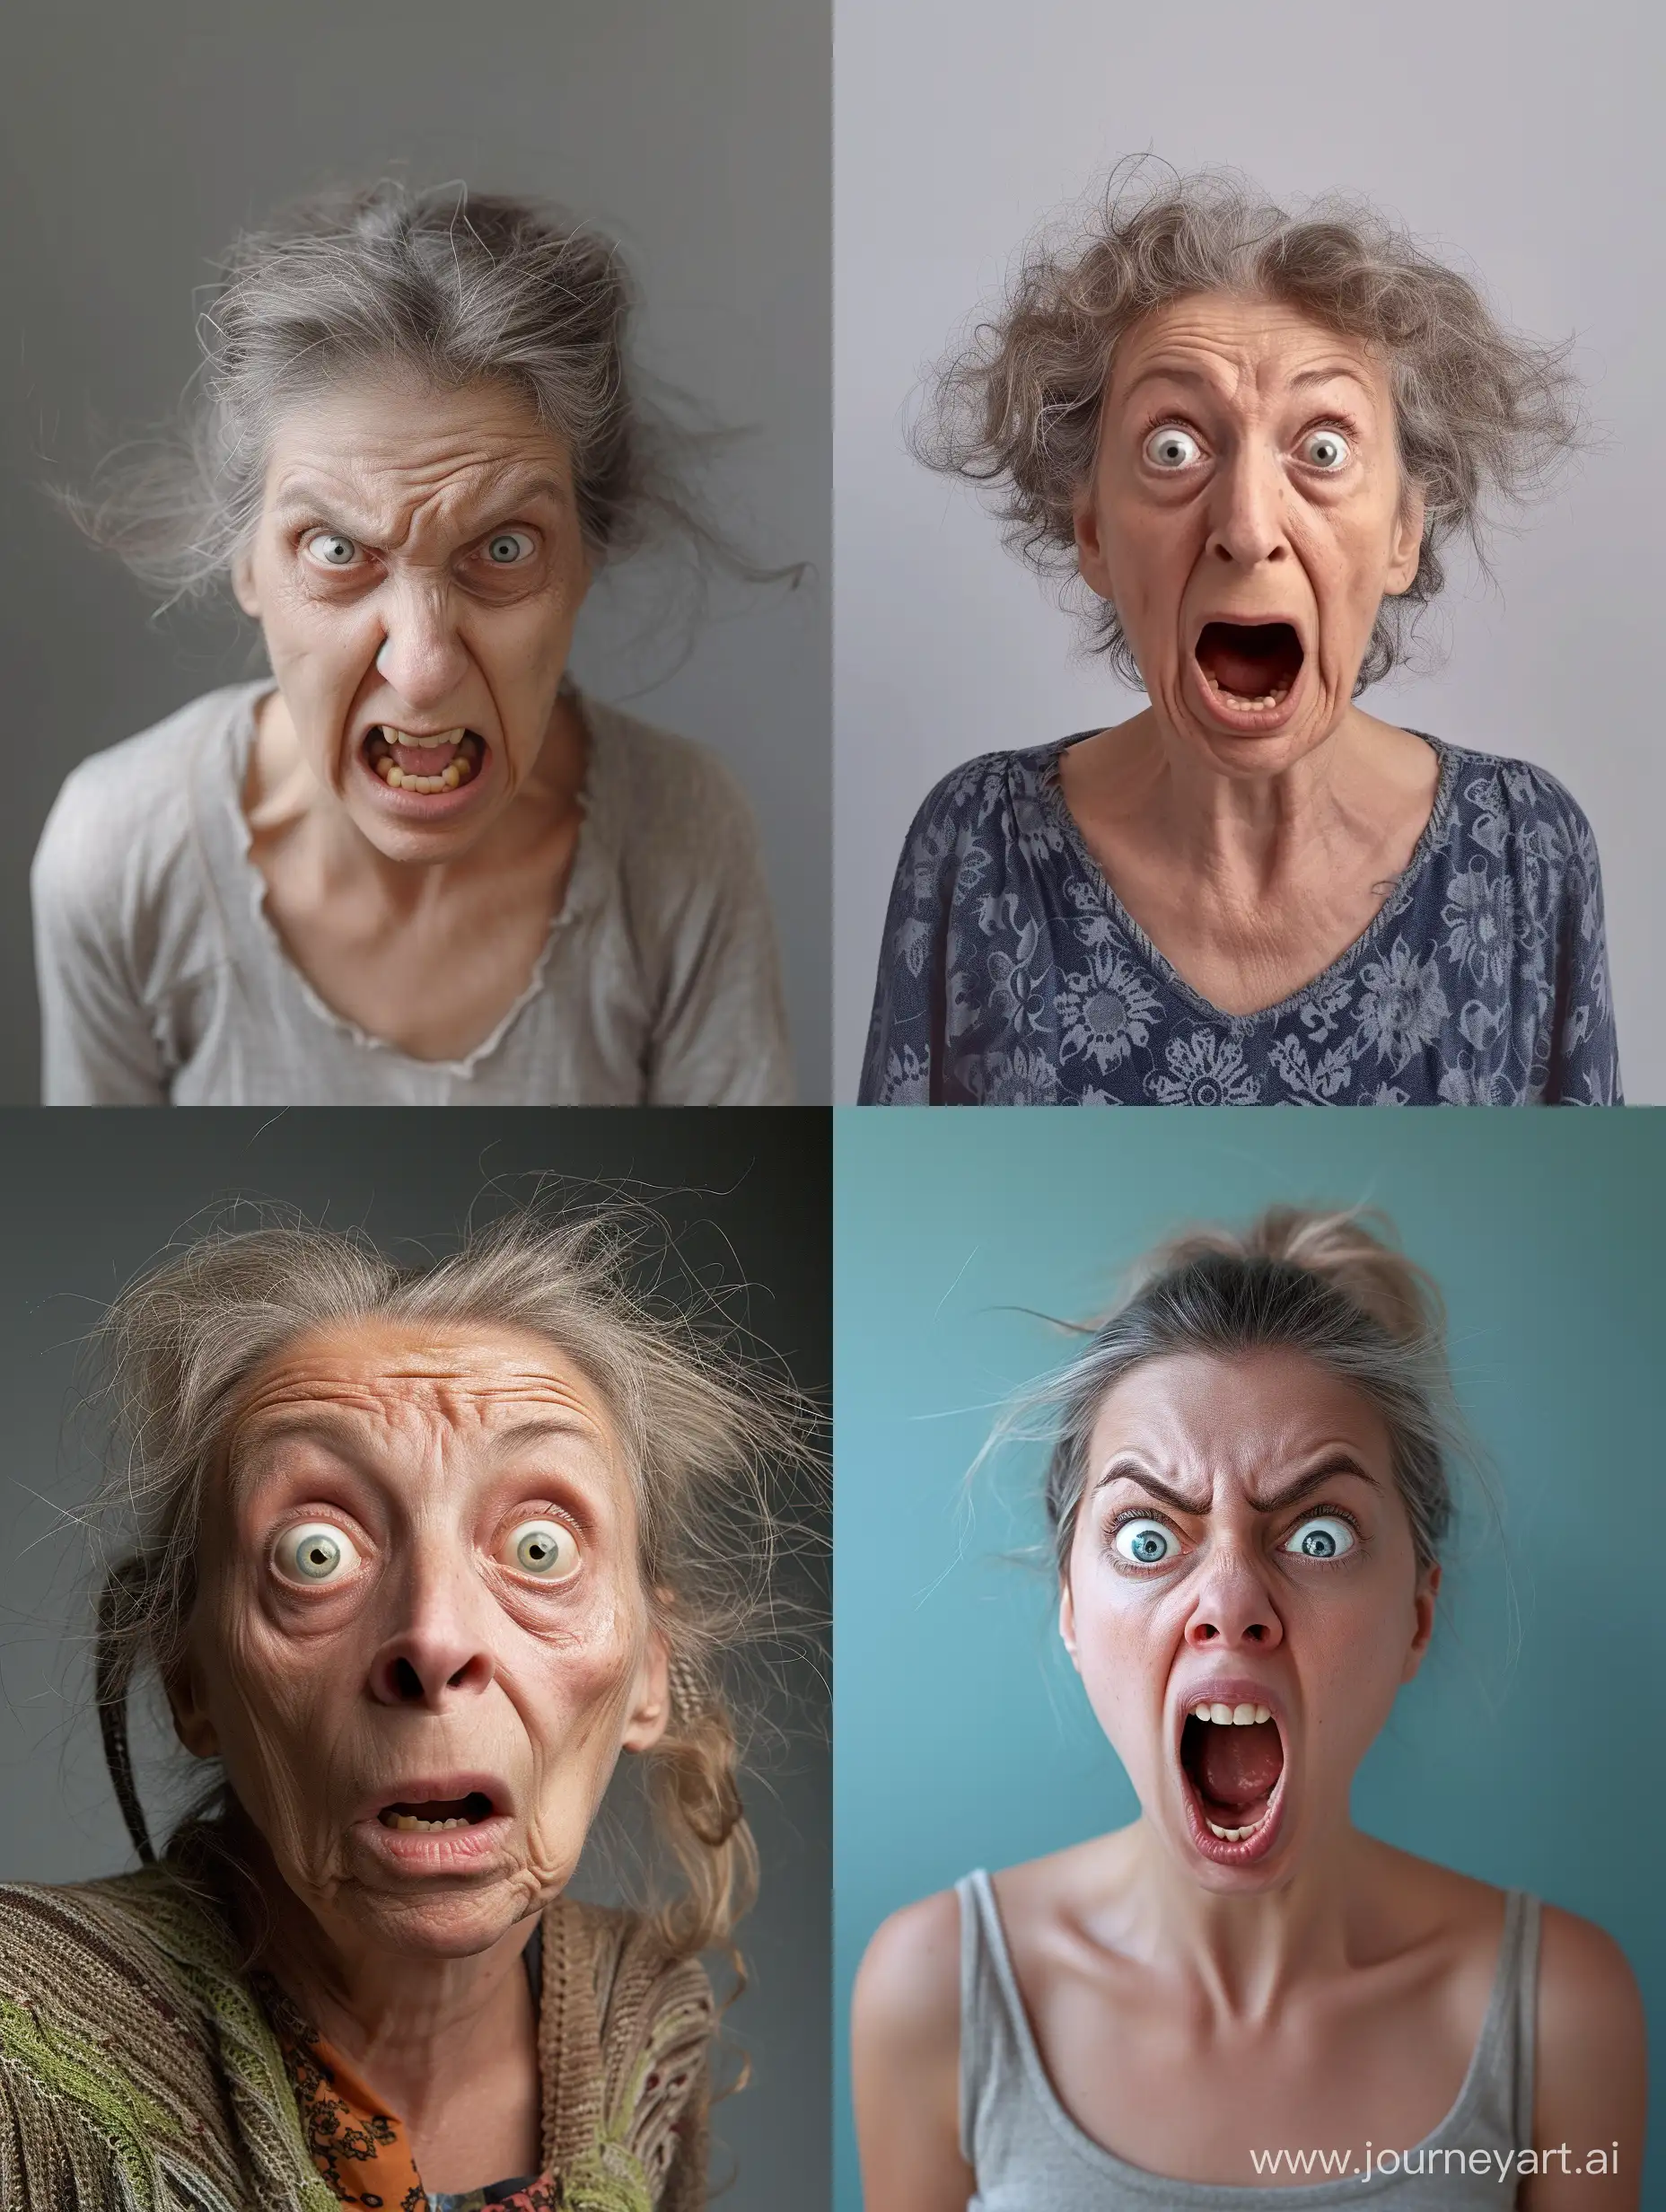 Eccentric-40YearOld-Woman-with-Wild-Expression